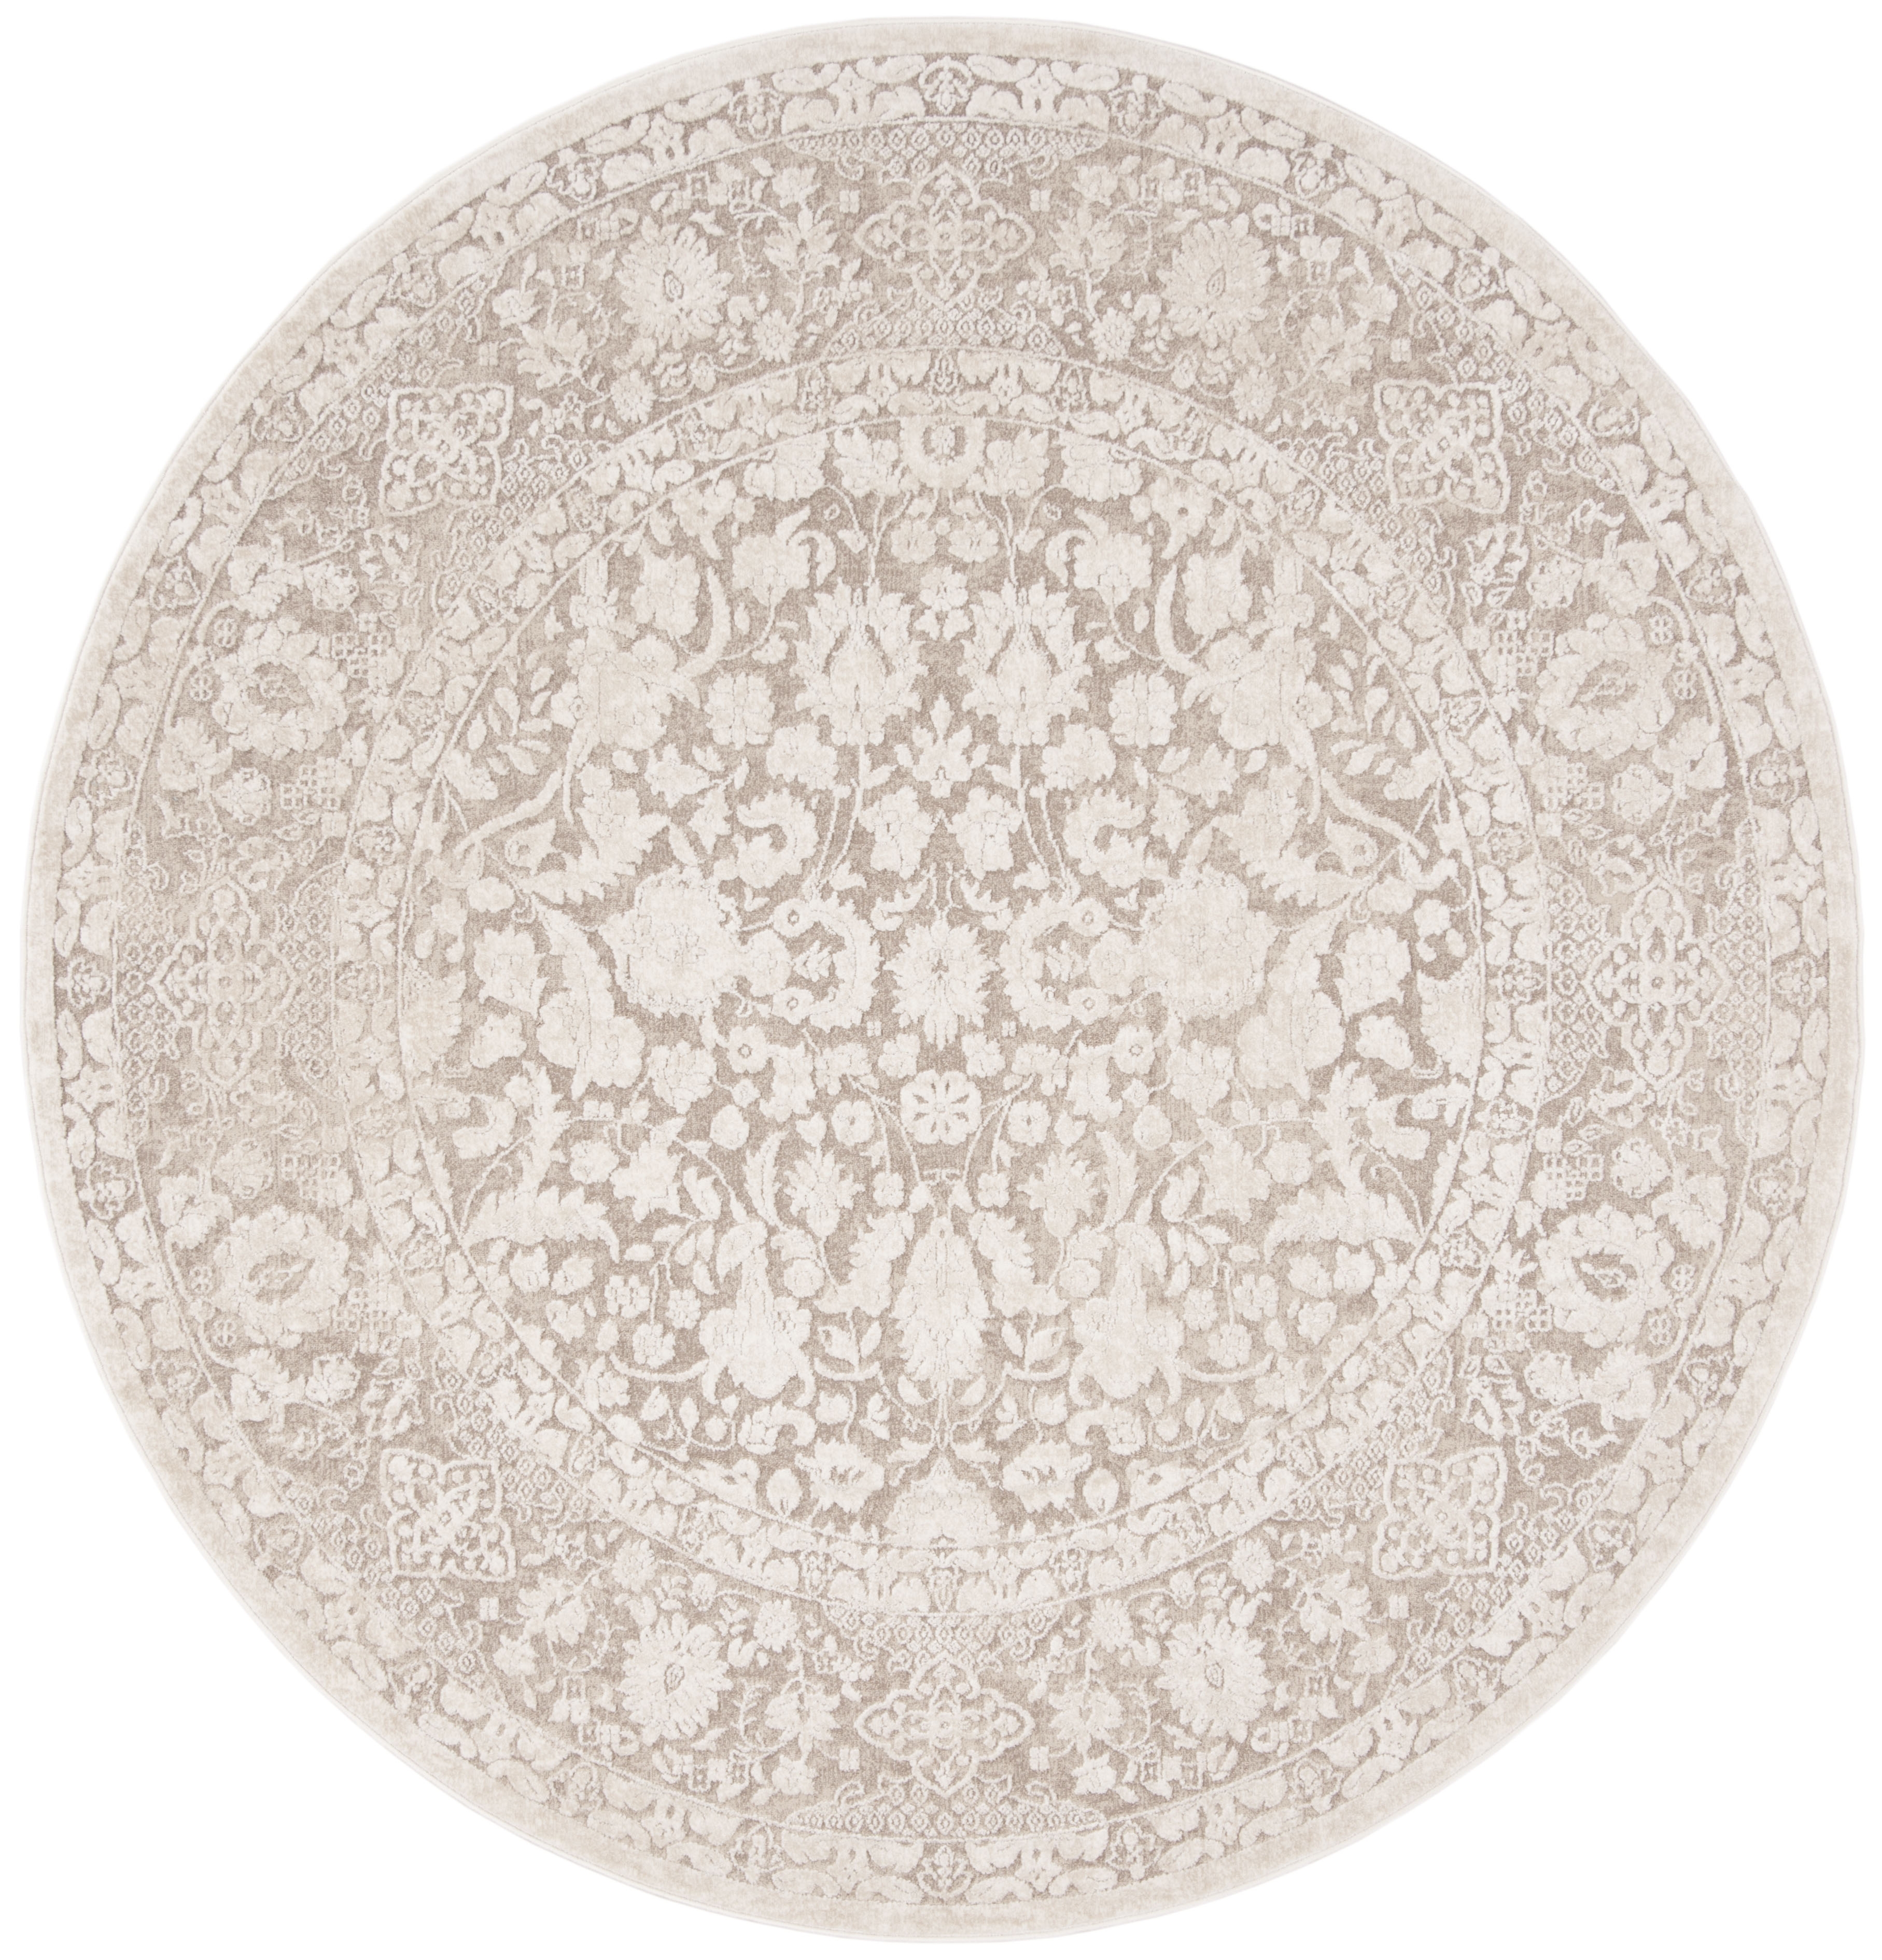 Arlo Home Woven Area Rug, RFT667A, Beige/Cream,  5' X 5' Round - Image 0